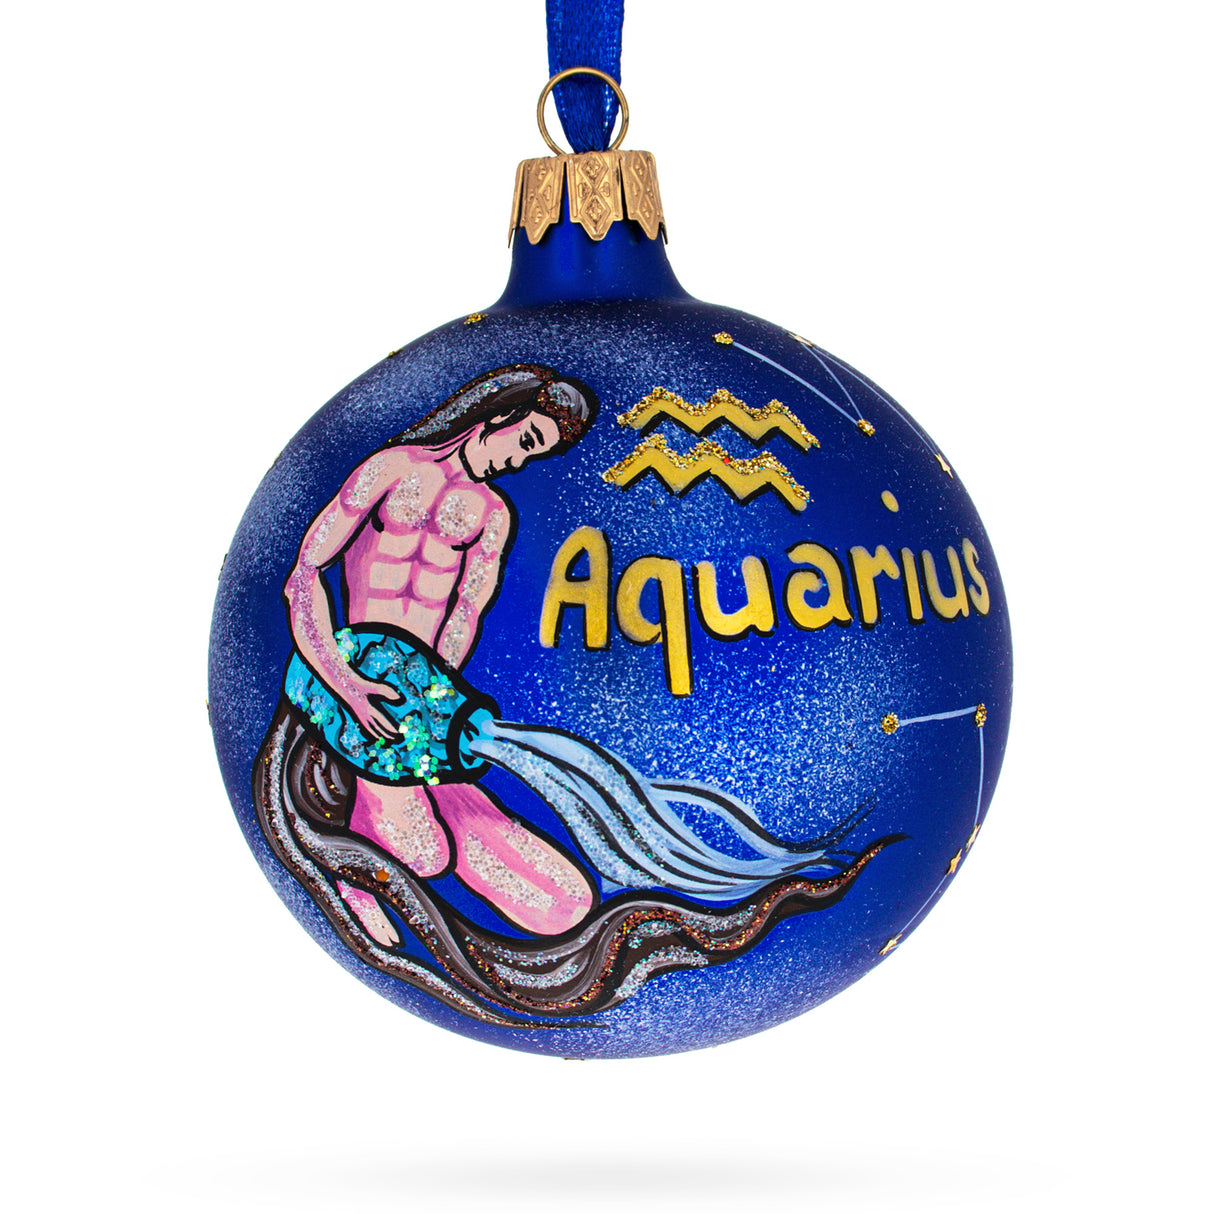 Water Bearer Aquarius: Zodiac Horoscope Sign Blown Glass Ball Christmas Ornament 3.25 Inches in Blue color, Round shape